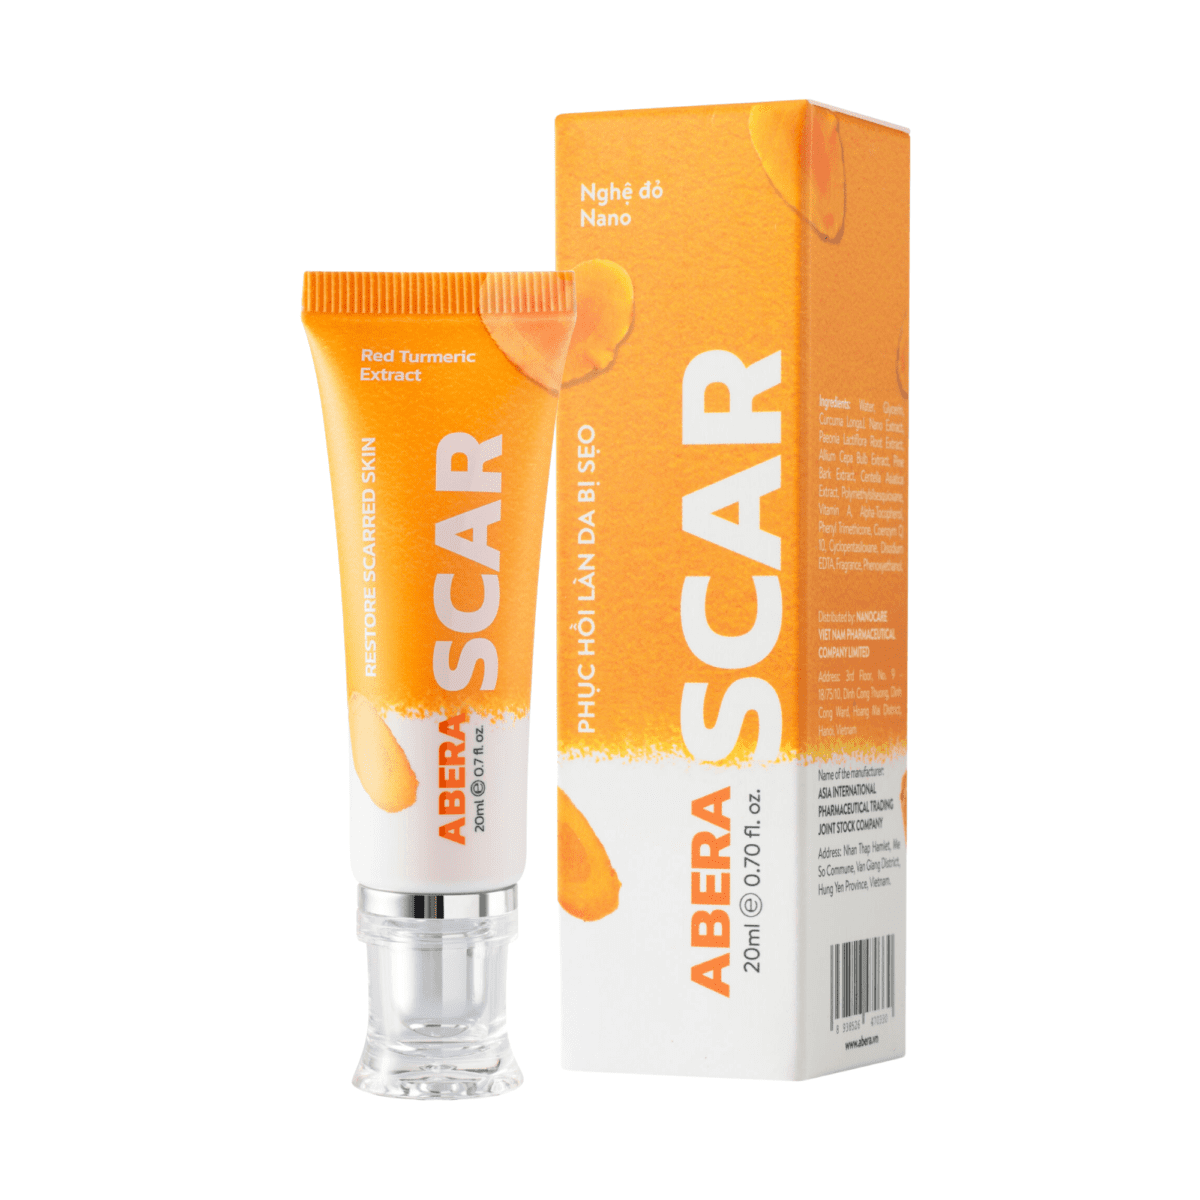 Abera Scar Red Turmeric Cream – Best-selling in-store products Top 1